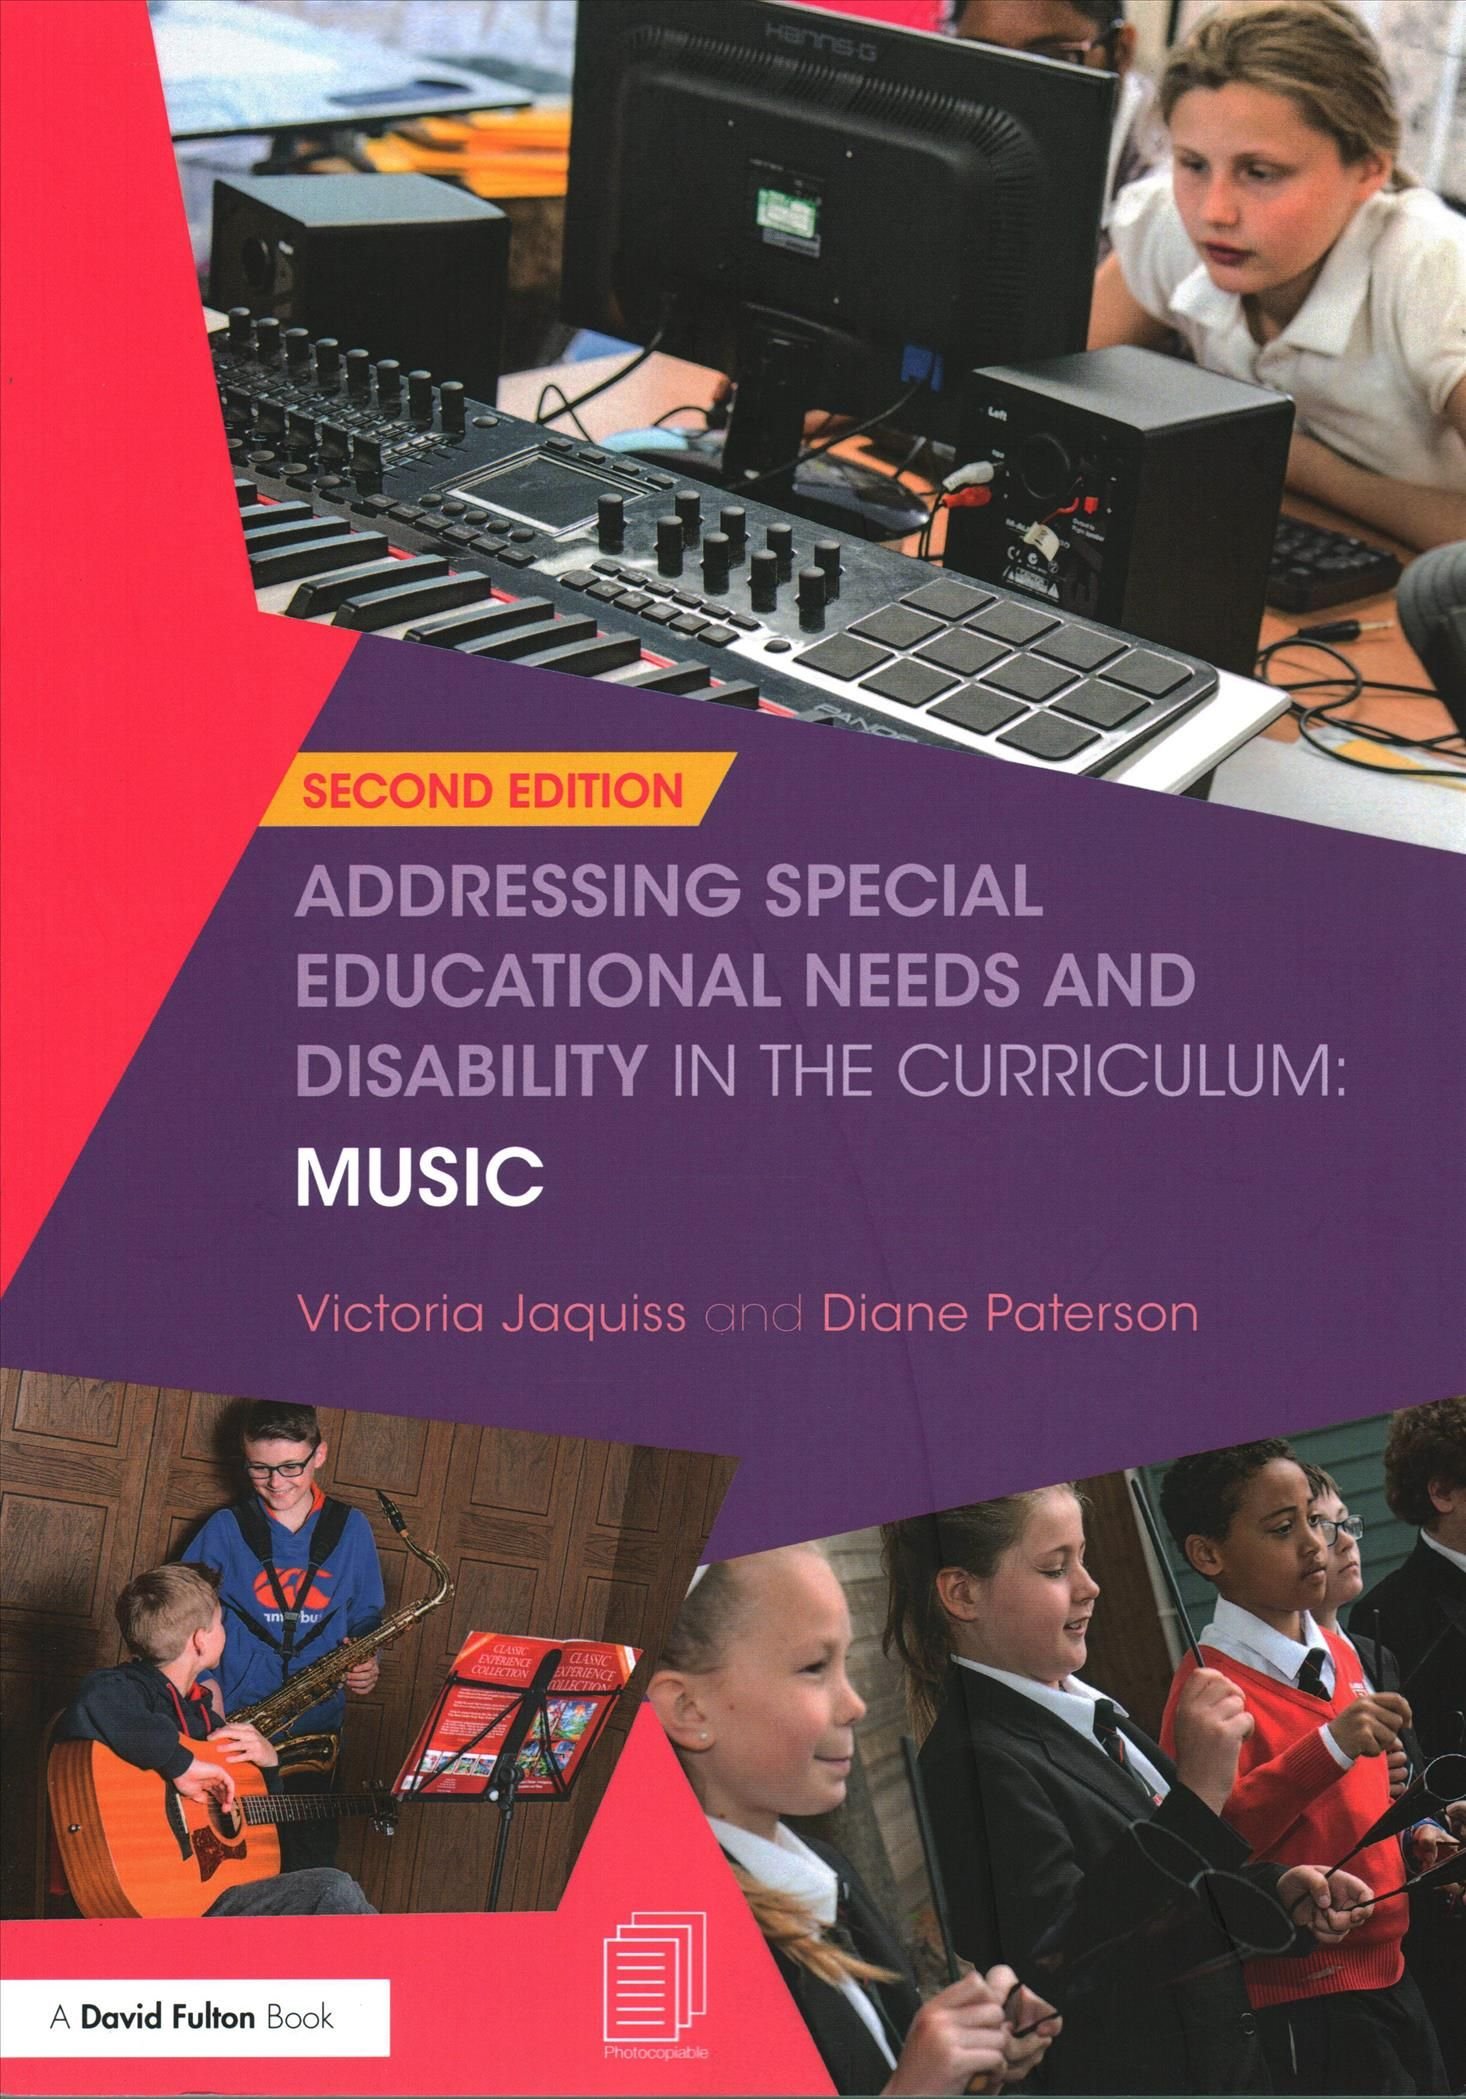 Addressing Special Educational Needs and Disability in the Curriculum: Music